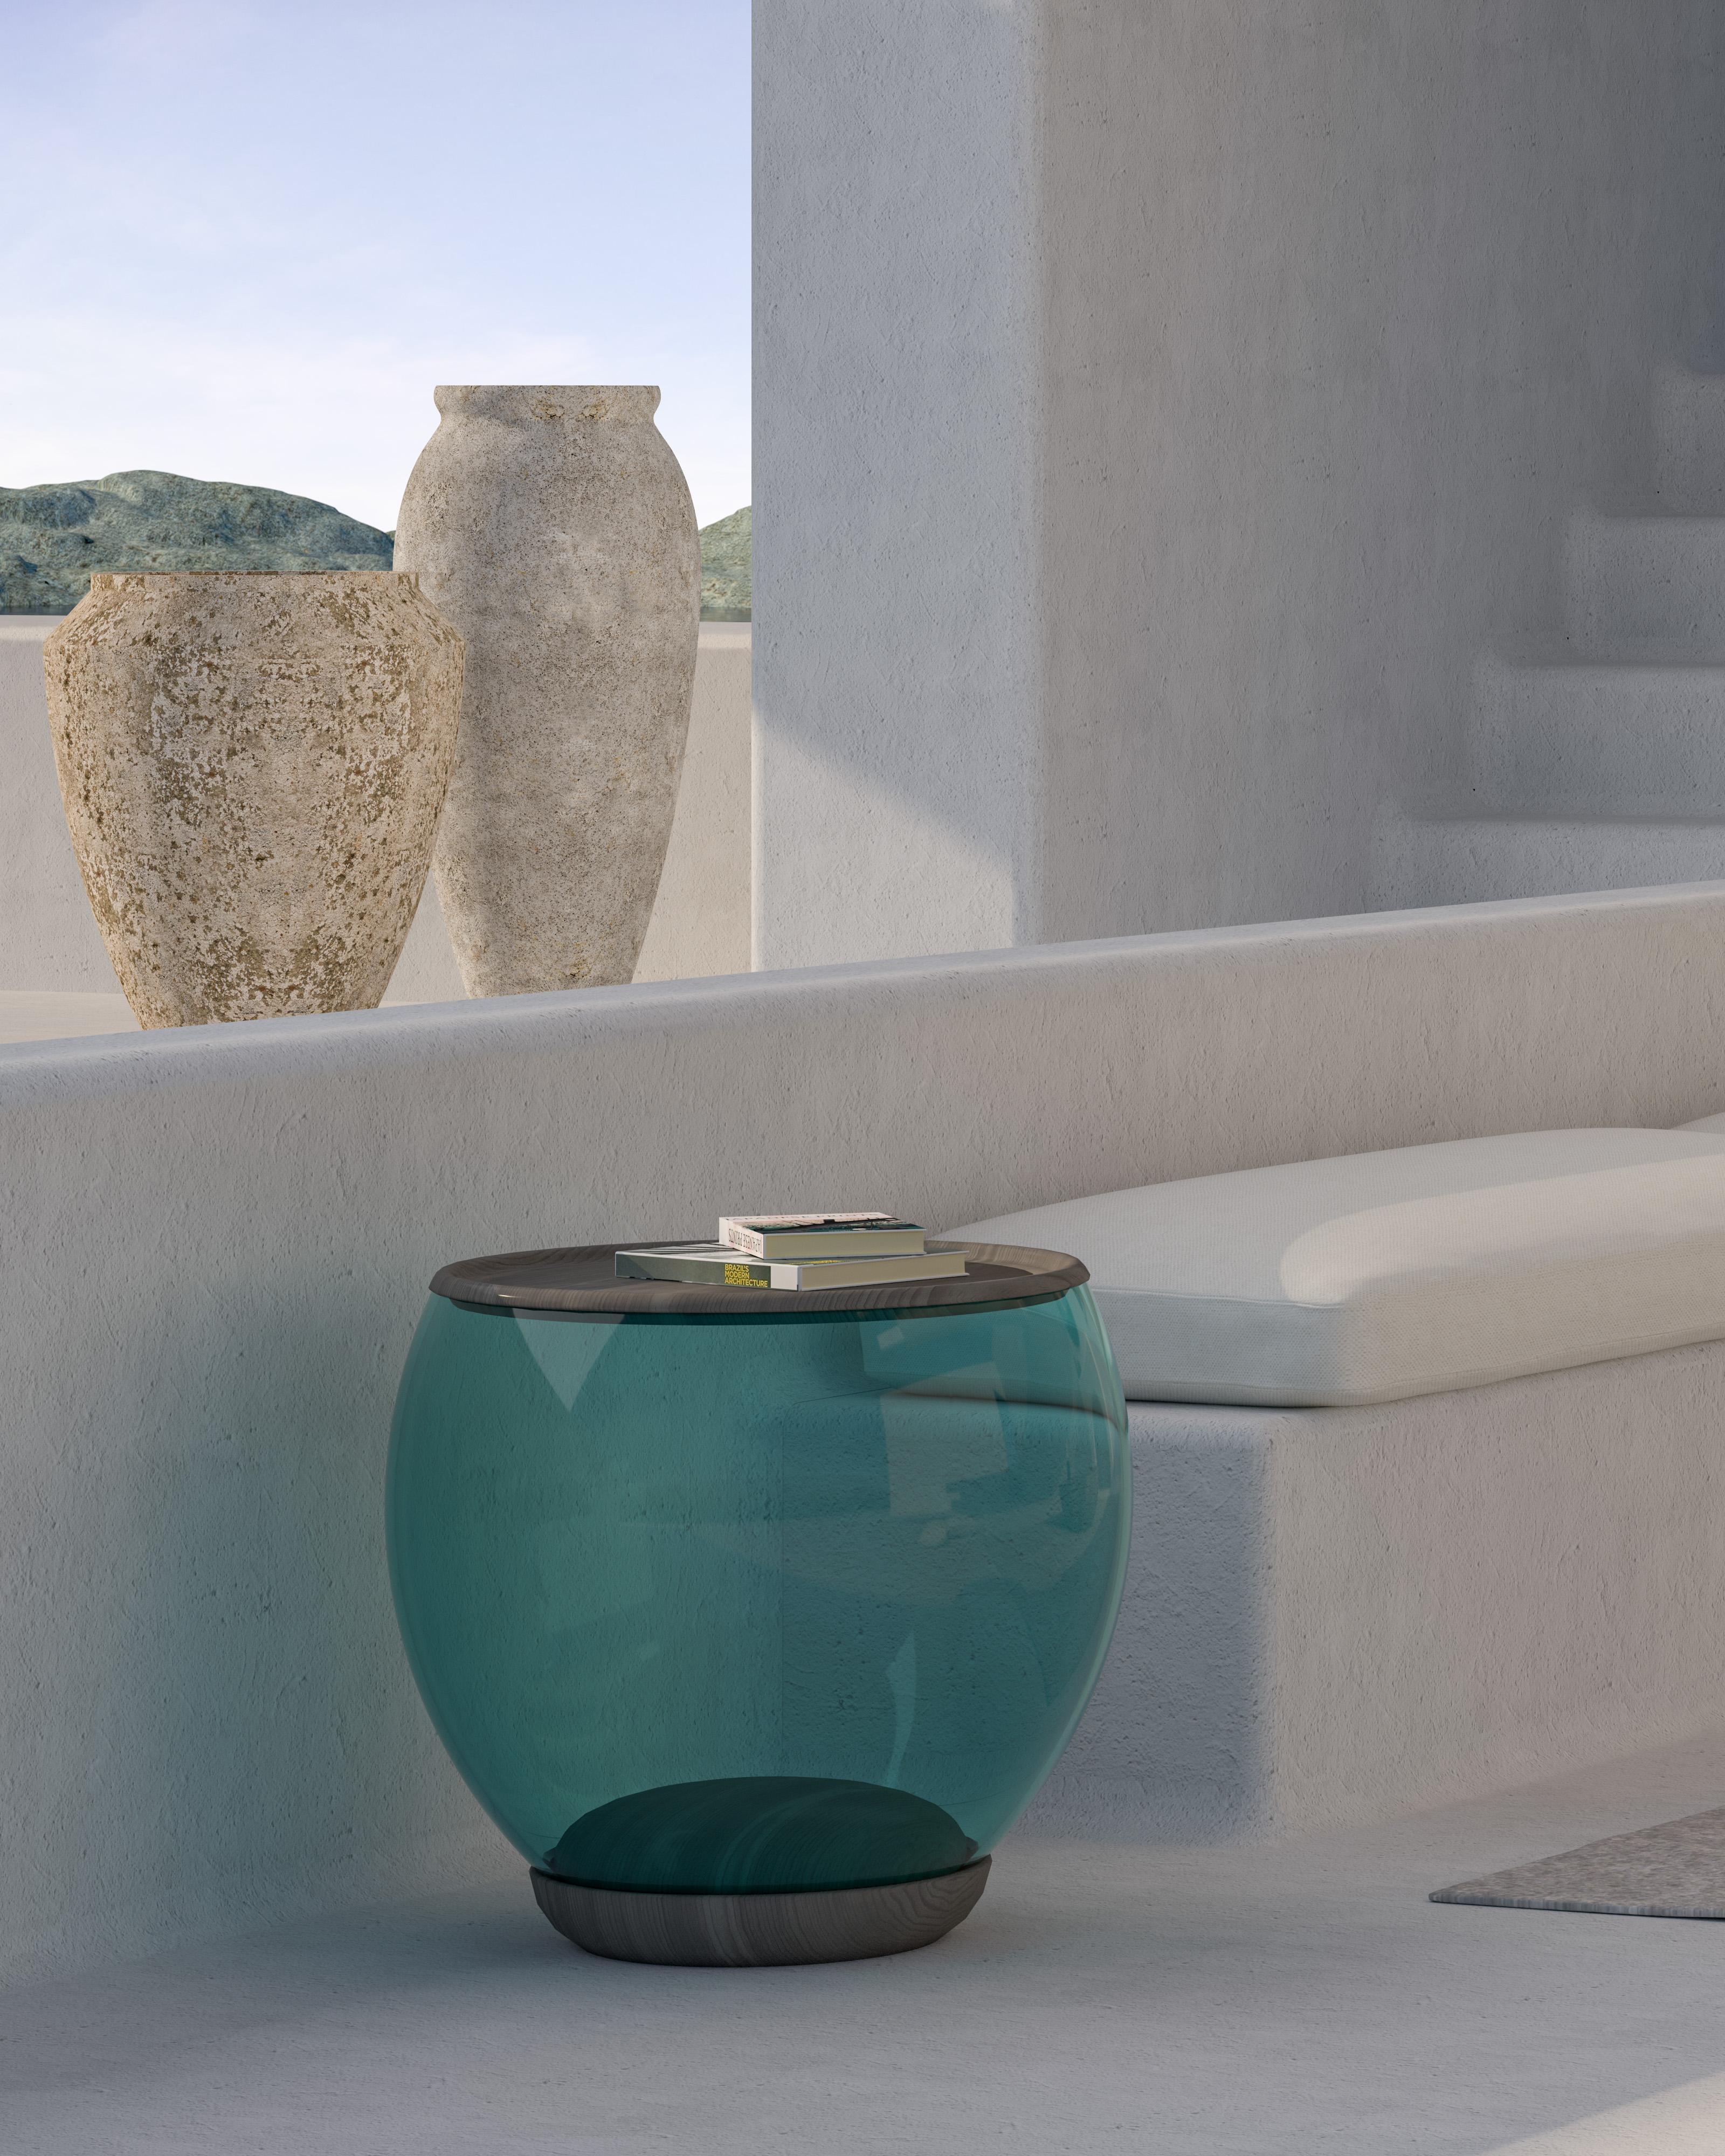 Ciocio is a side table inspired by the natural shaping force of water. Resembling a small river pebble, rounded and smoothed by the current, and a single drop of water gently resting on top. A perfect balance in a fleeting moment of stillness. It is